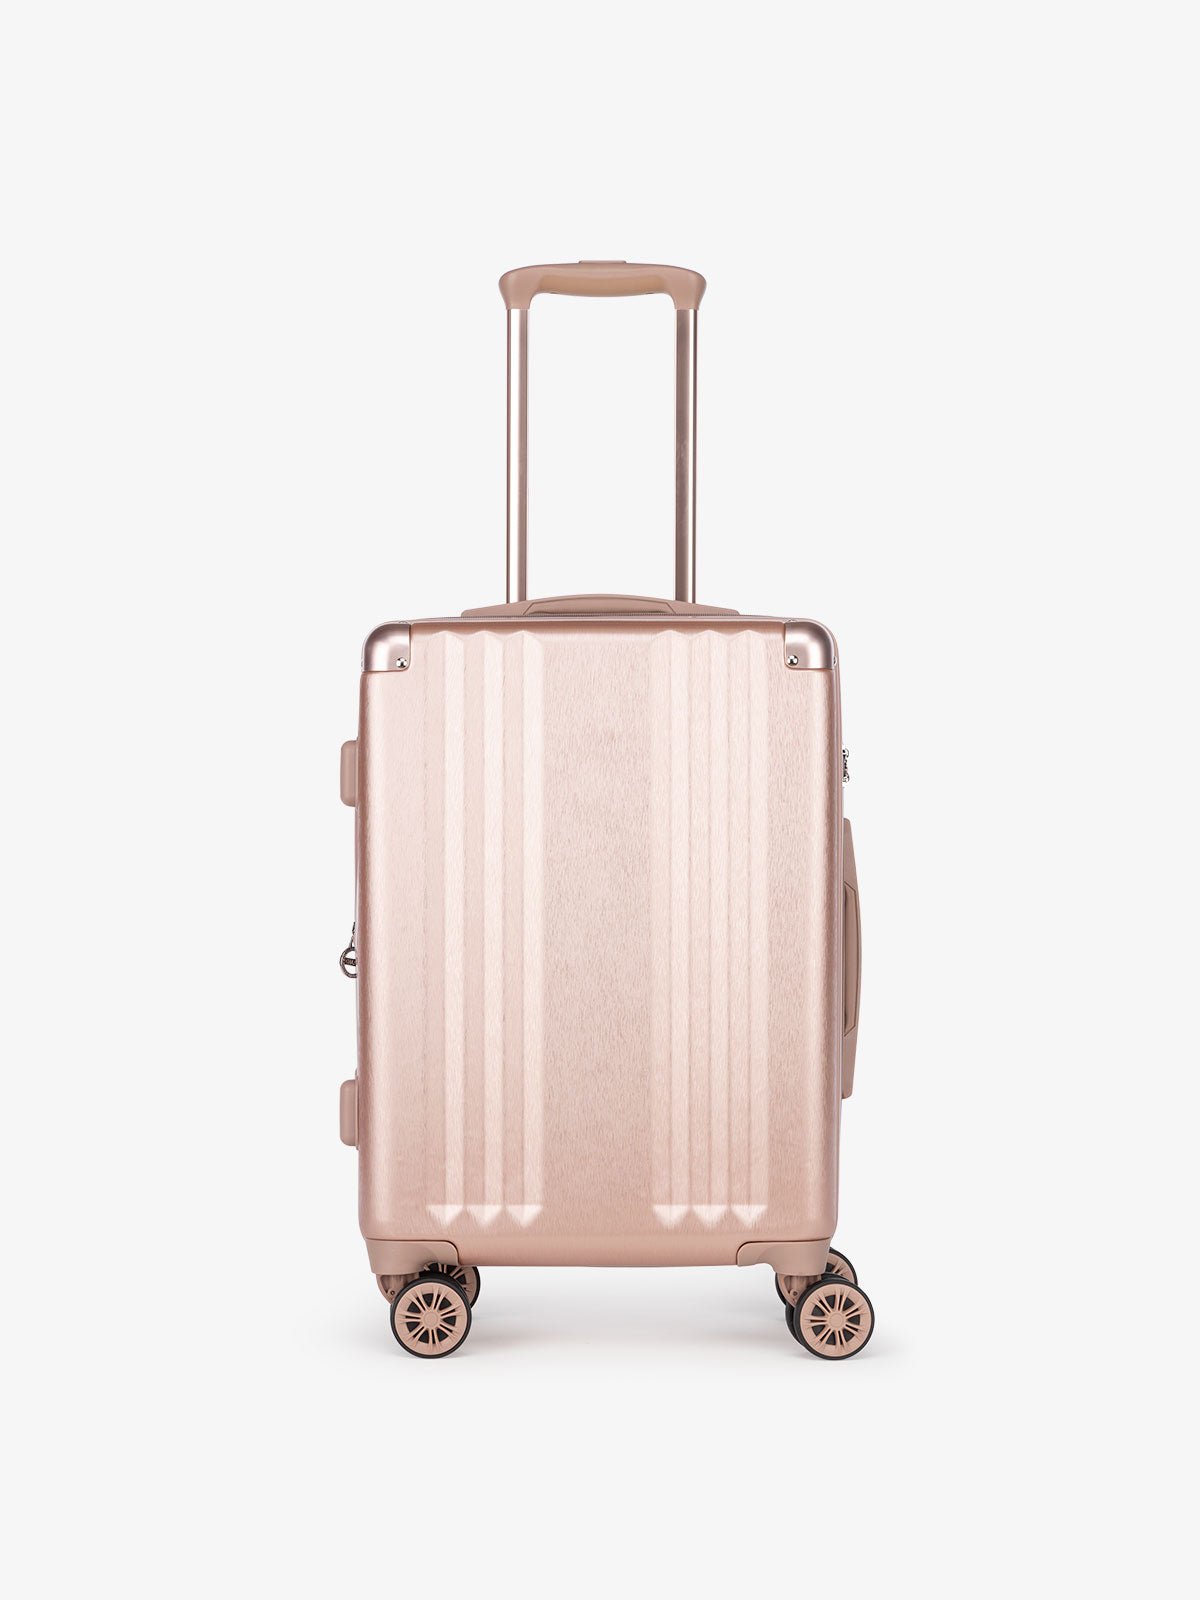 rose gold CALPAK Ambeur 22 inch hard shell carry on suitcase as a part of a luggage set